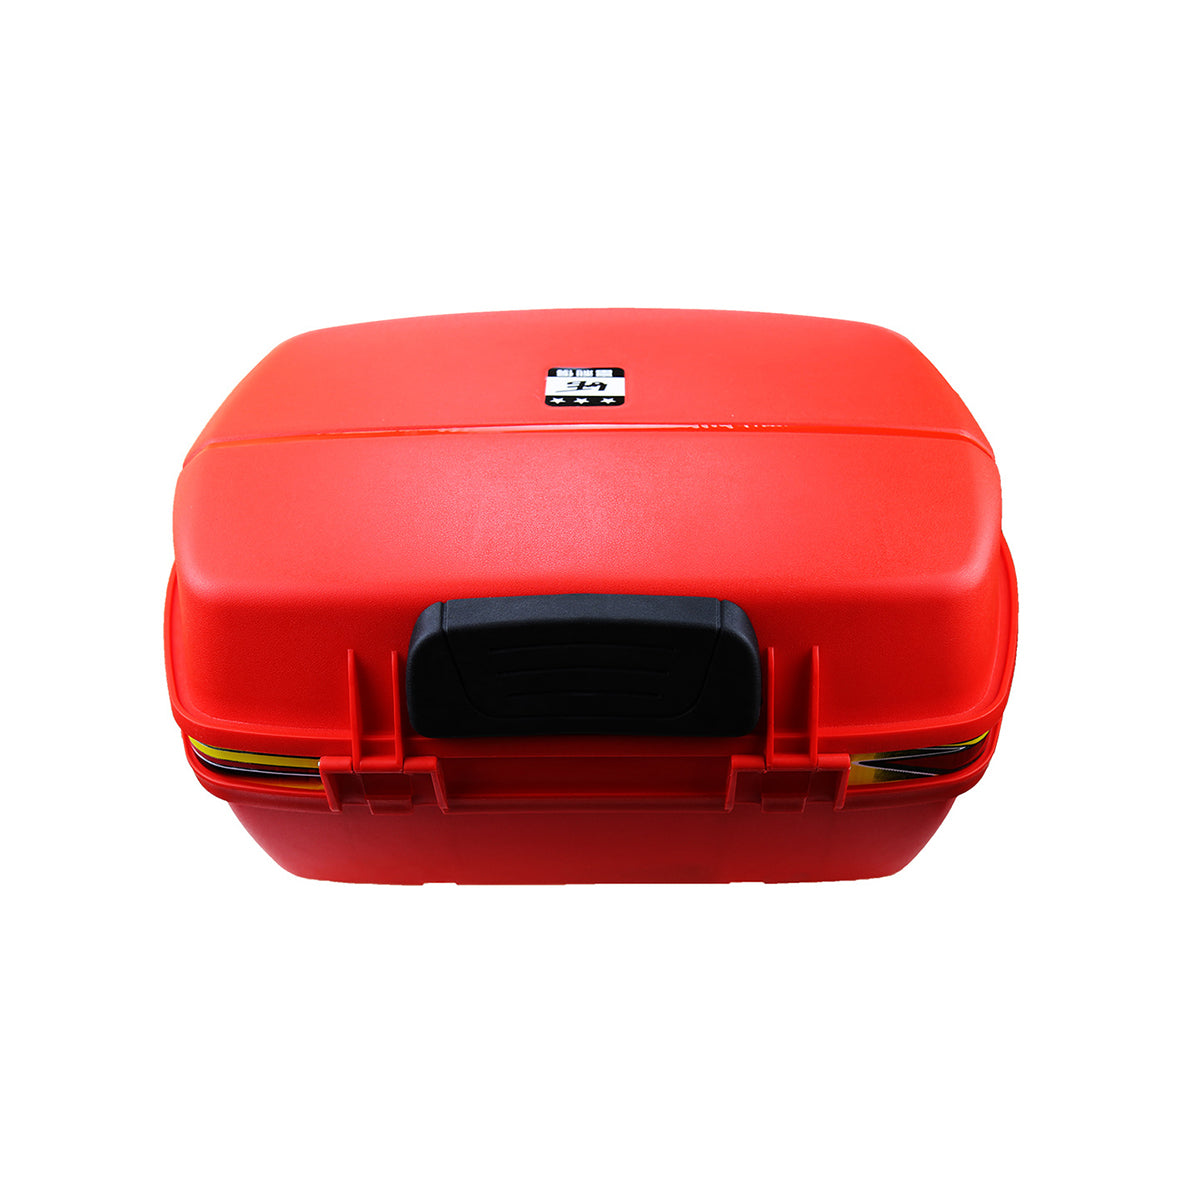 Tomato Motorcycle Tour Tail Box Scooter Trunk Luggage Top Lock Storage Carrier Case